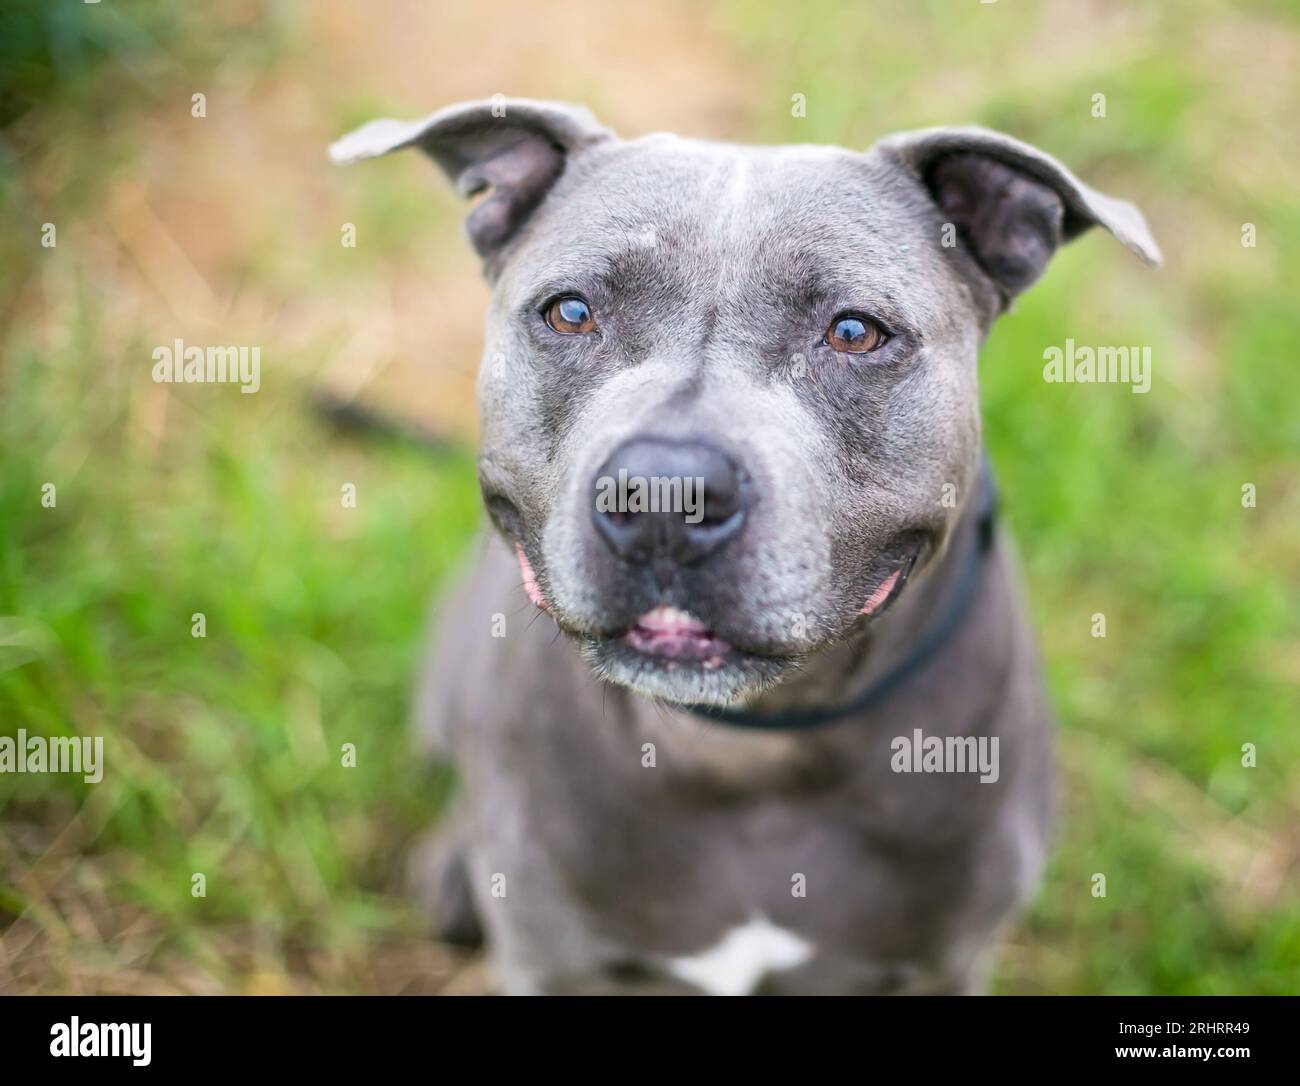 A gray Pit Bull Terrier mixed breed dog sitting and looking up with a grin on its face Stock Photo